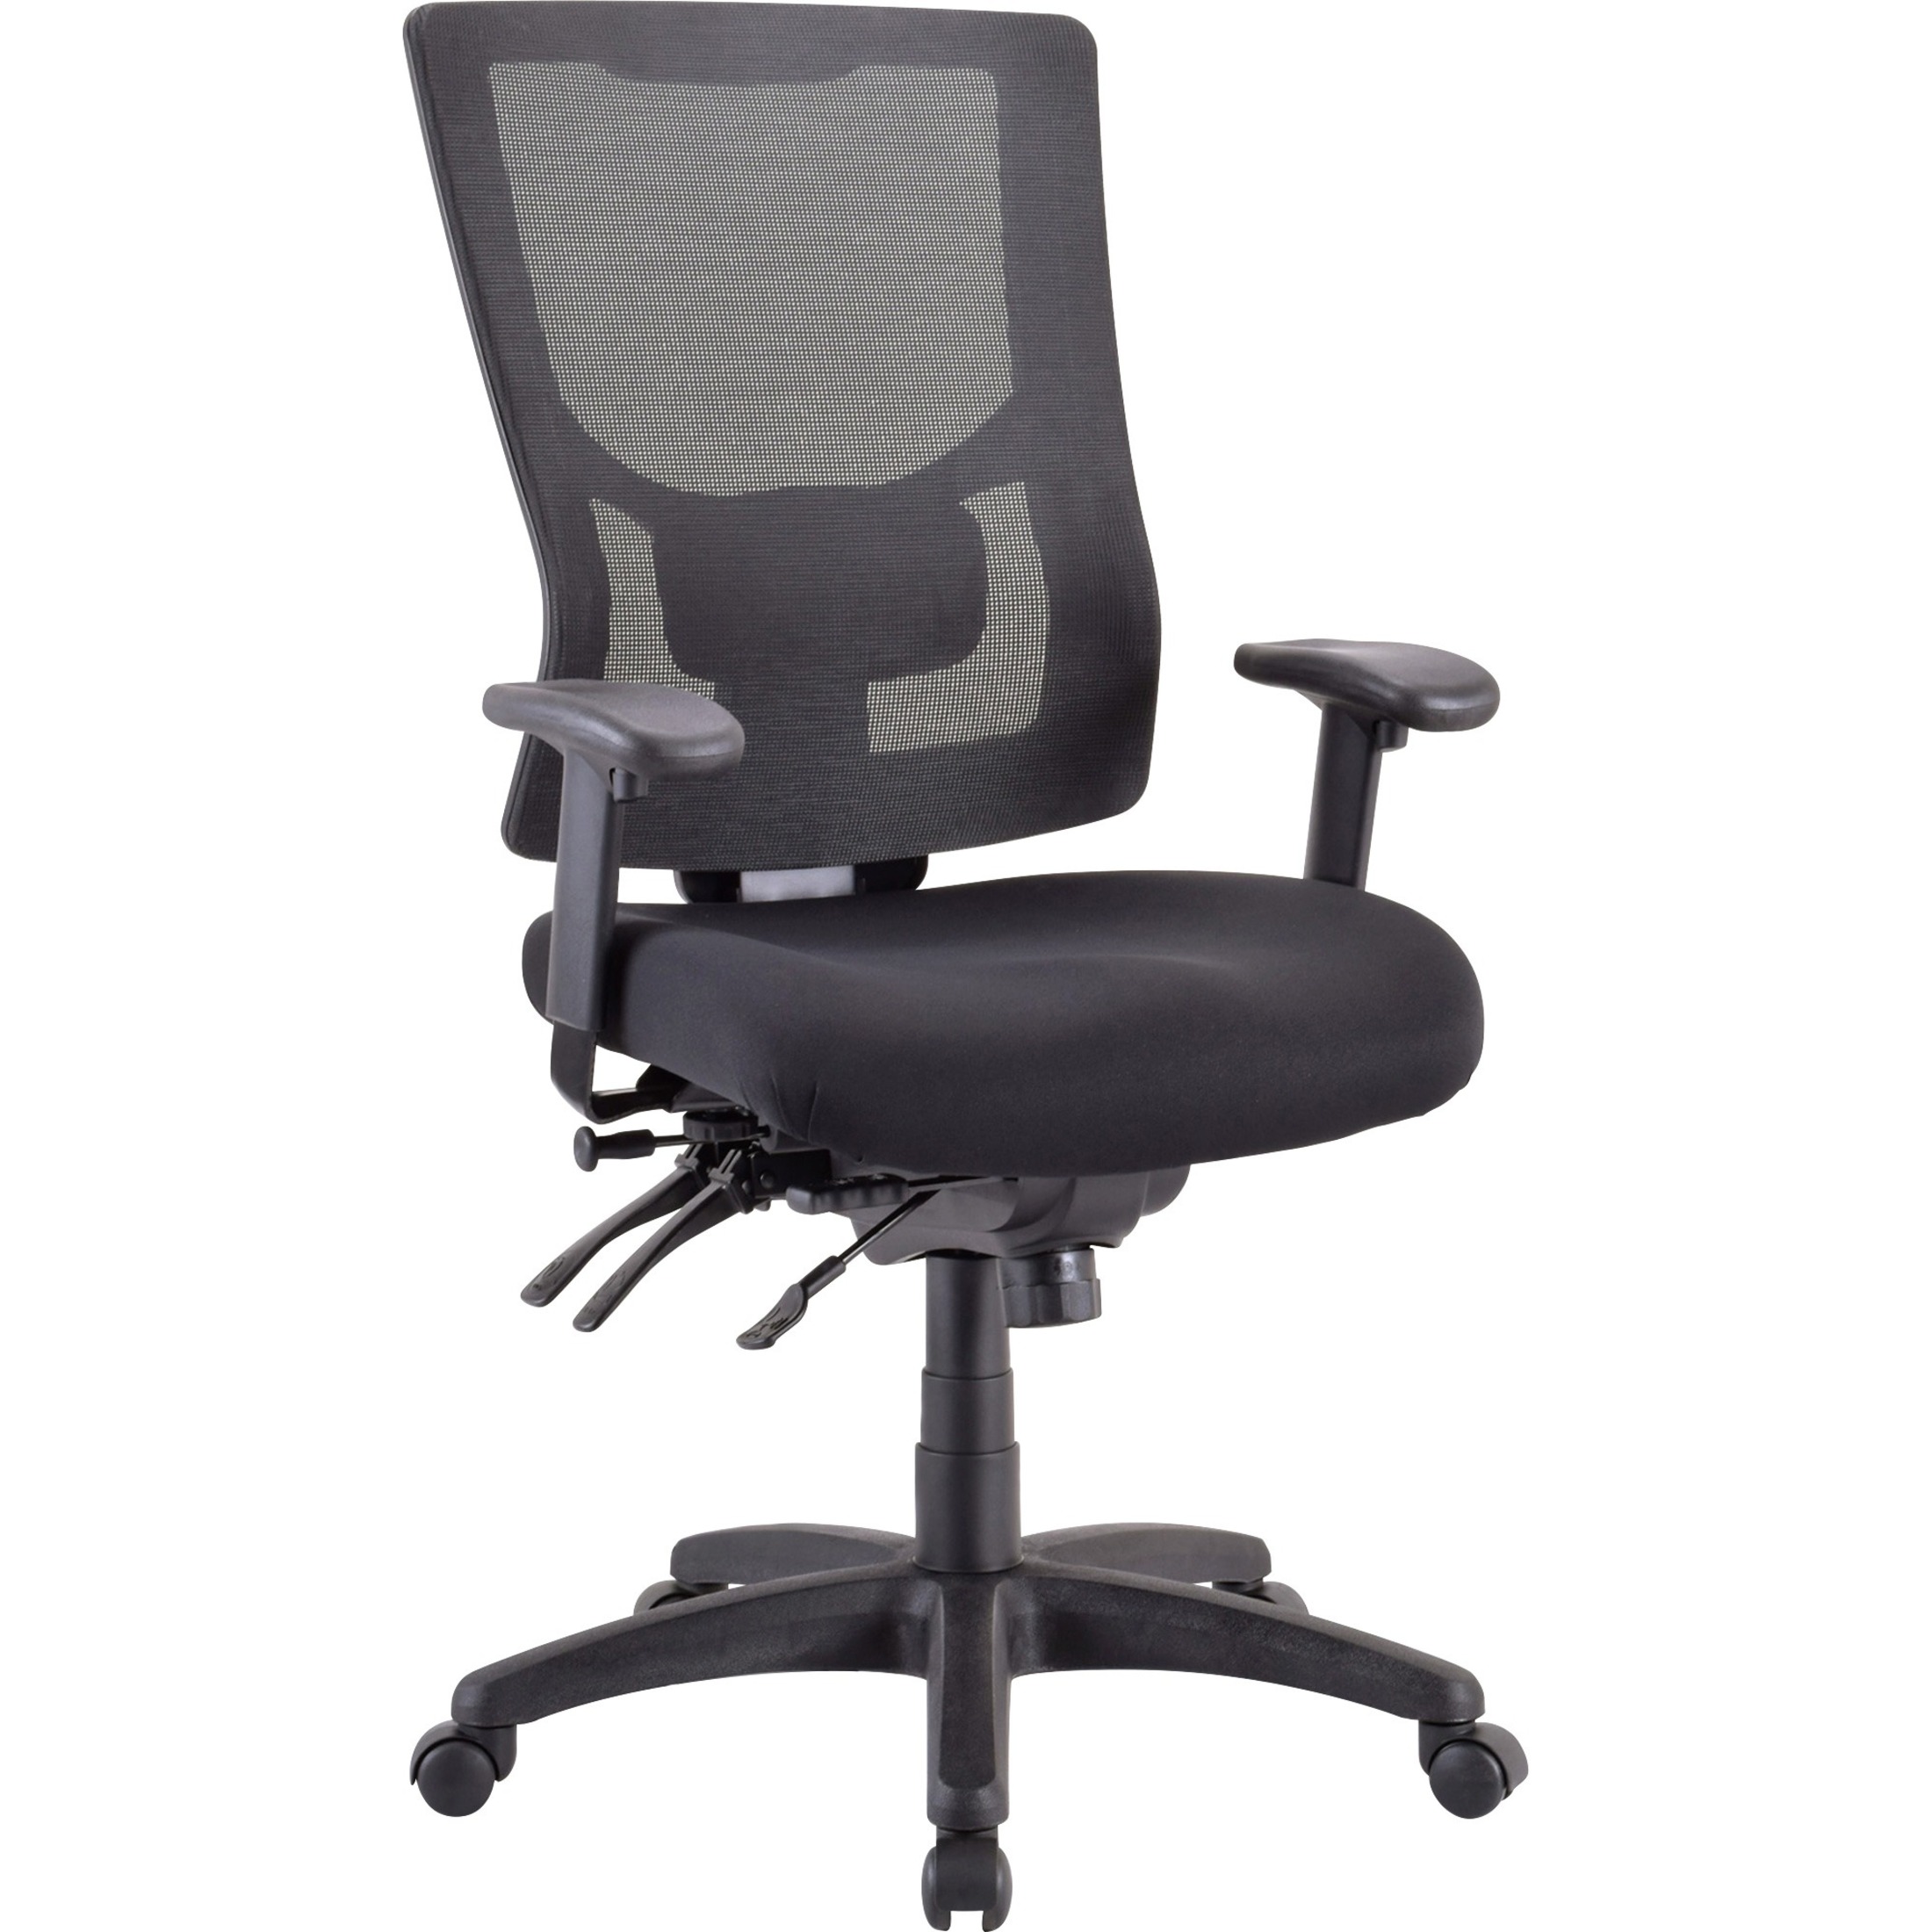 Lorell Conjure Executive High-back Mesh Back Chair - image 1 of 6